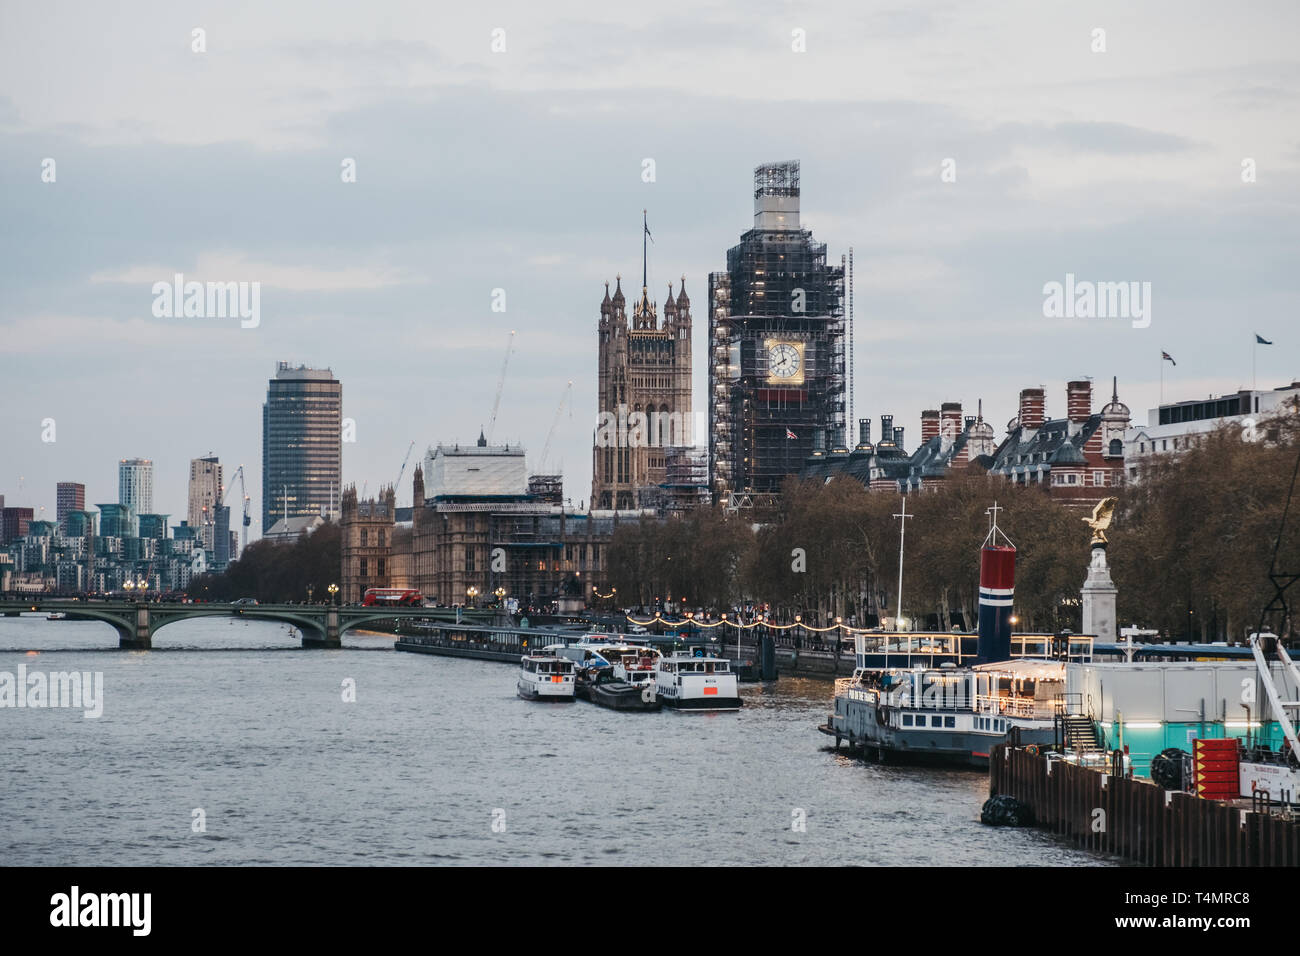 London, UK - April 13, 2019: View of London skyline and Big Ben in scaffolding from Millennium Bridge. London is one of the most visited cities in the Stock Photo